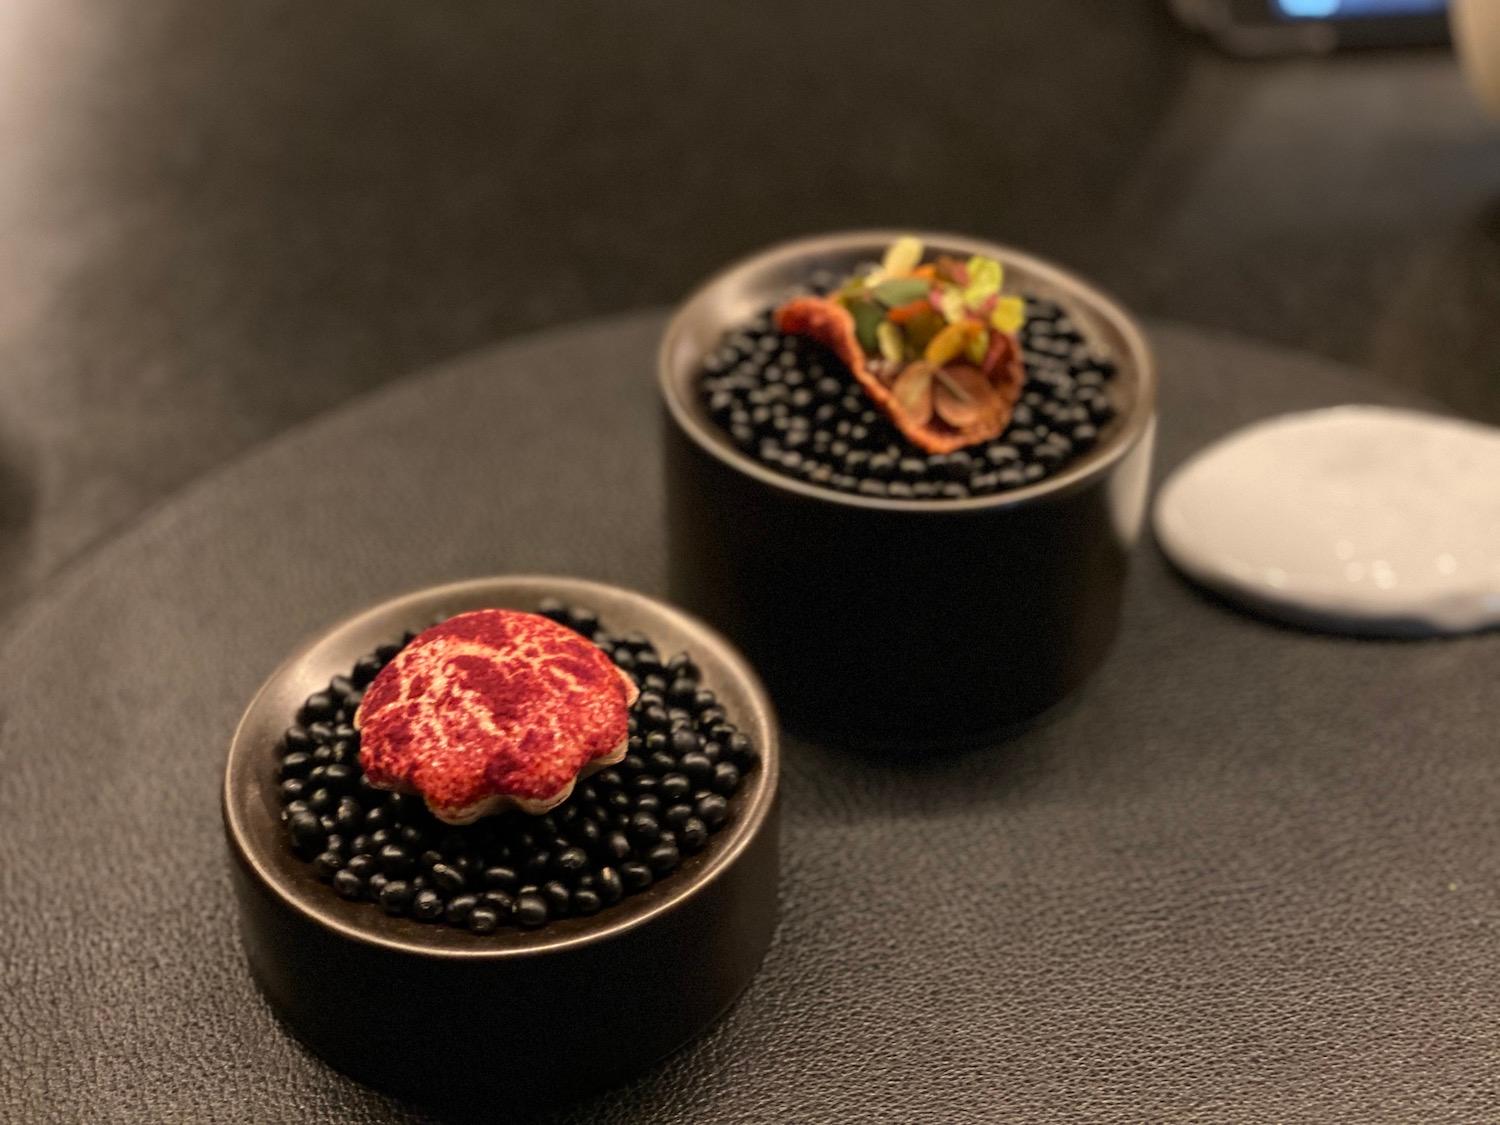 Fine Dining at its Best: SOIGNÉ Restaurant in Seoul